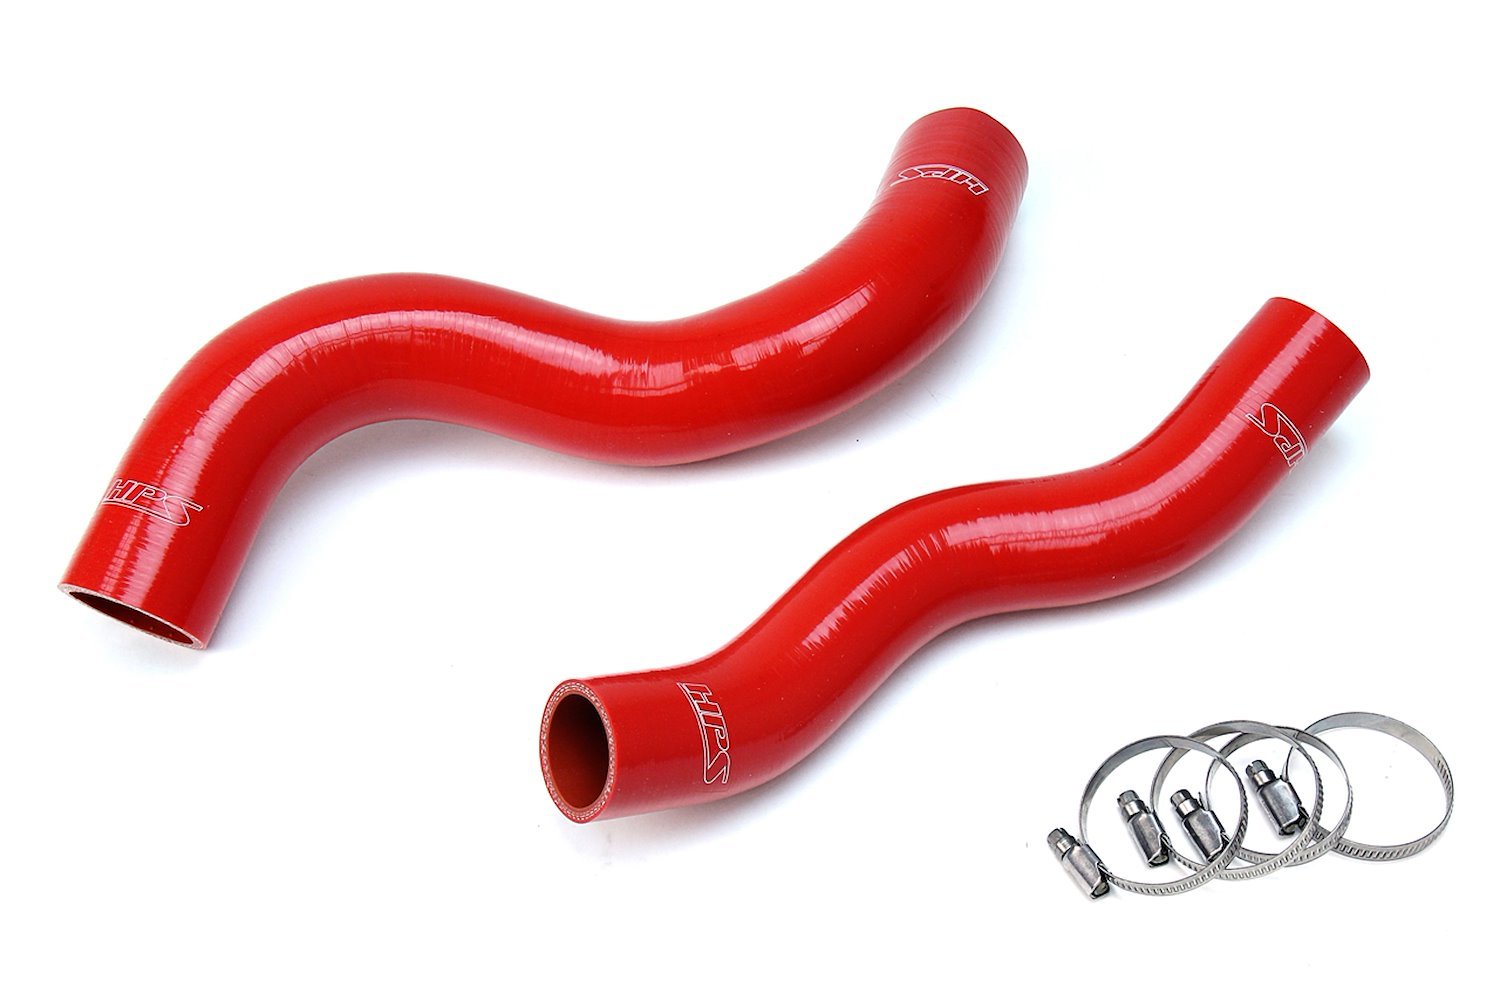 57-1703-RED Radiator Hose Kit, High-Temp 3-Ply Reinforced Silicone, Replace OEM Rubber Radiator Coolant Hoses